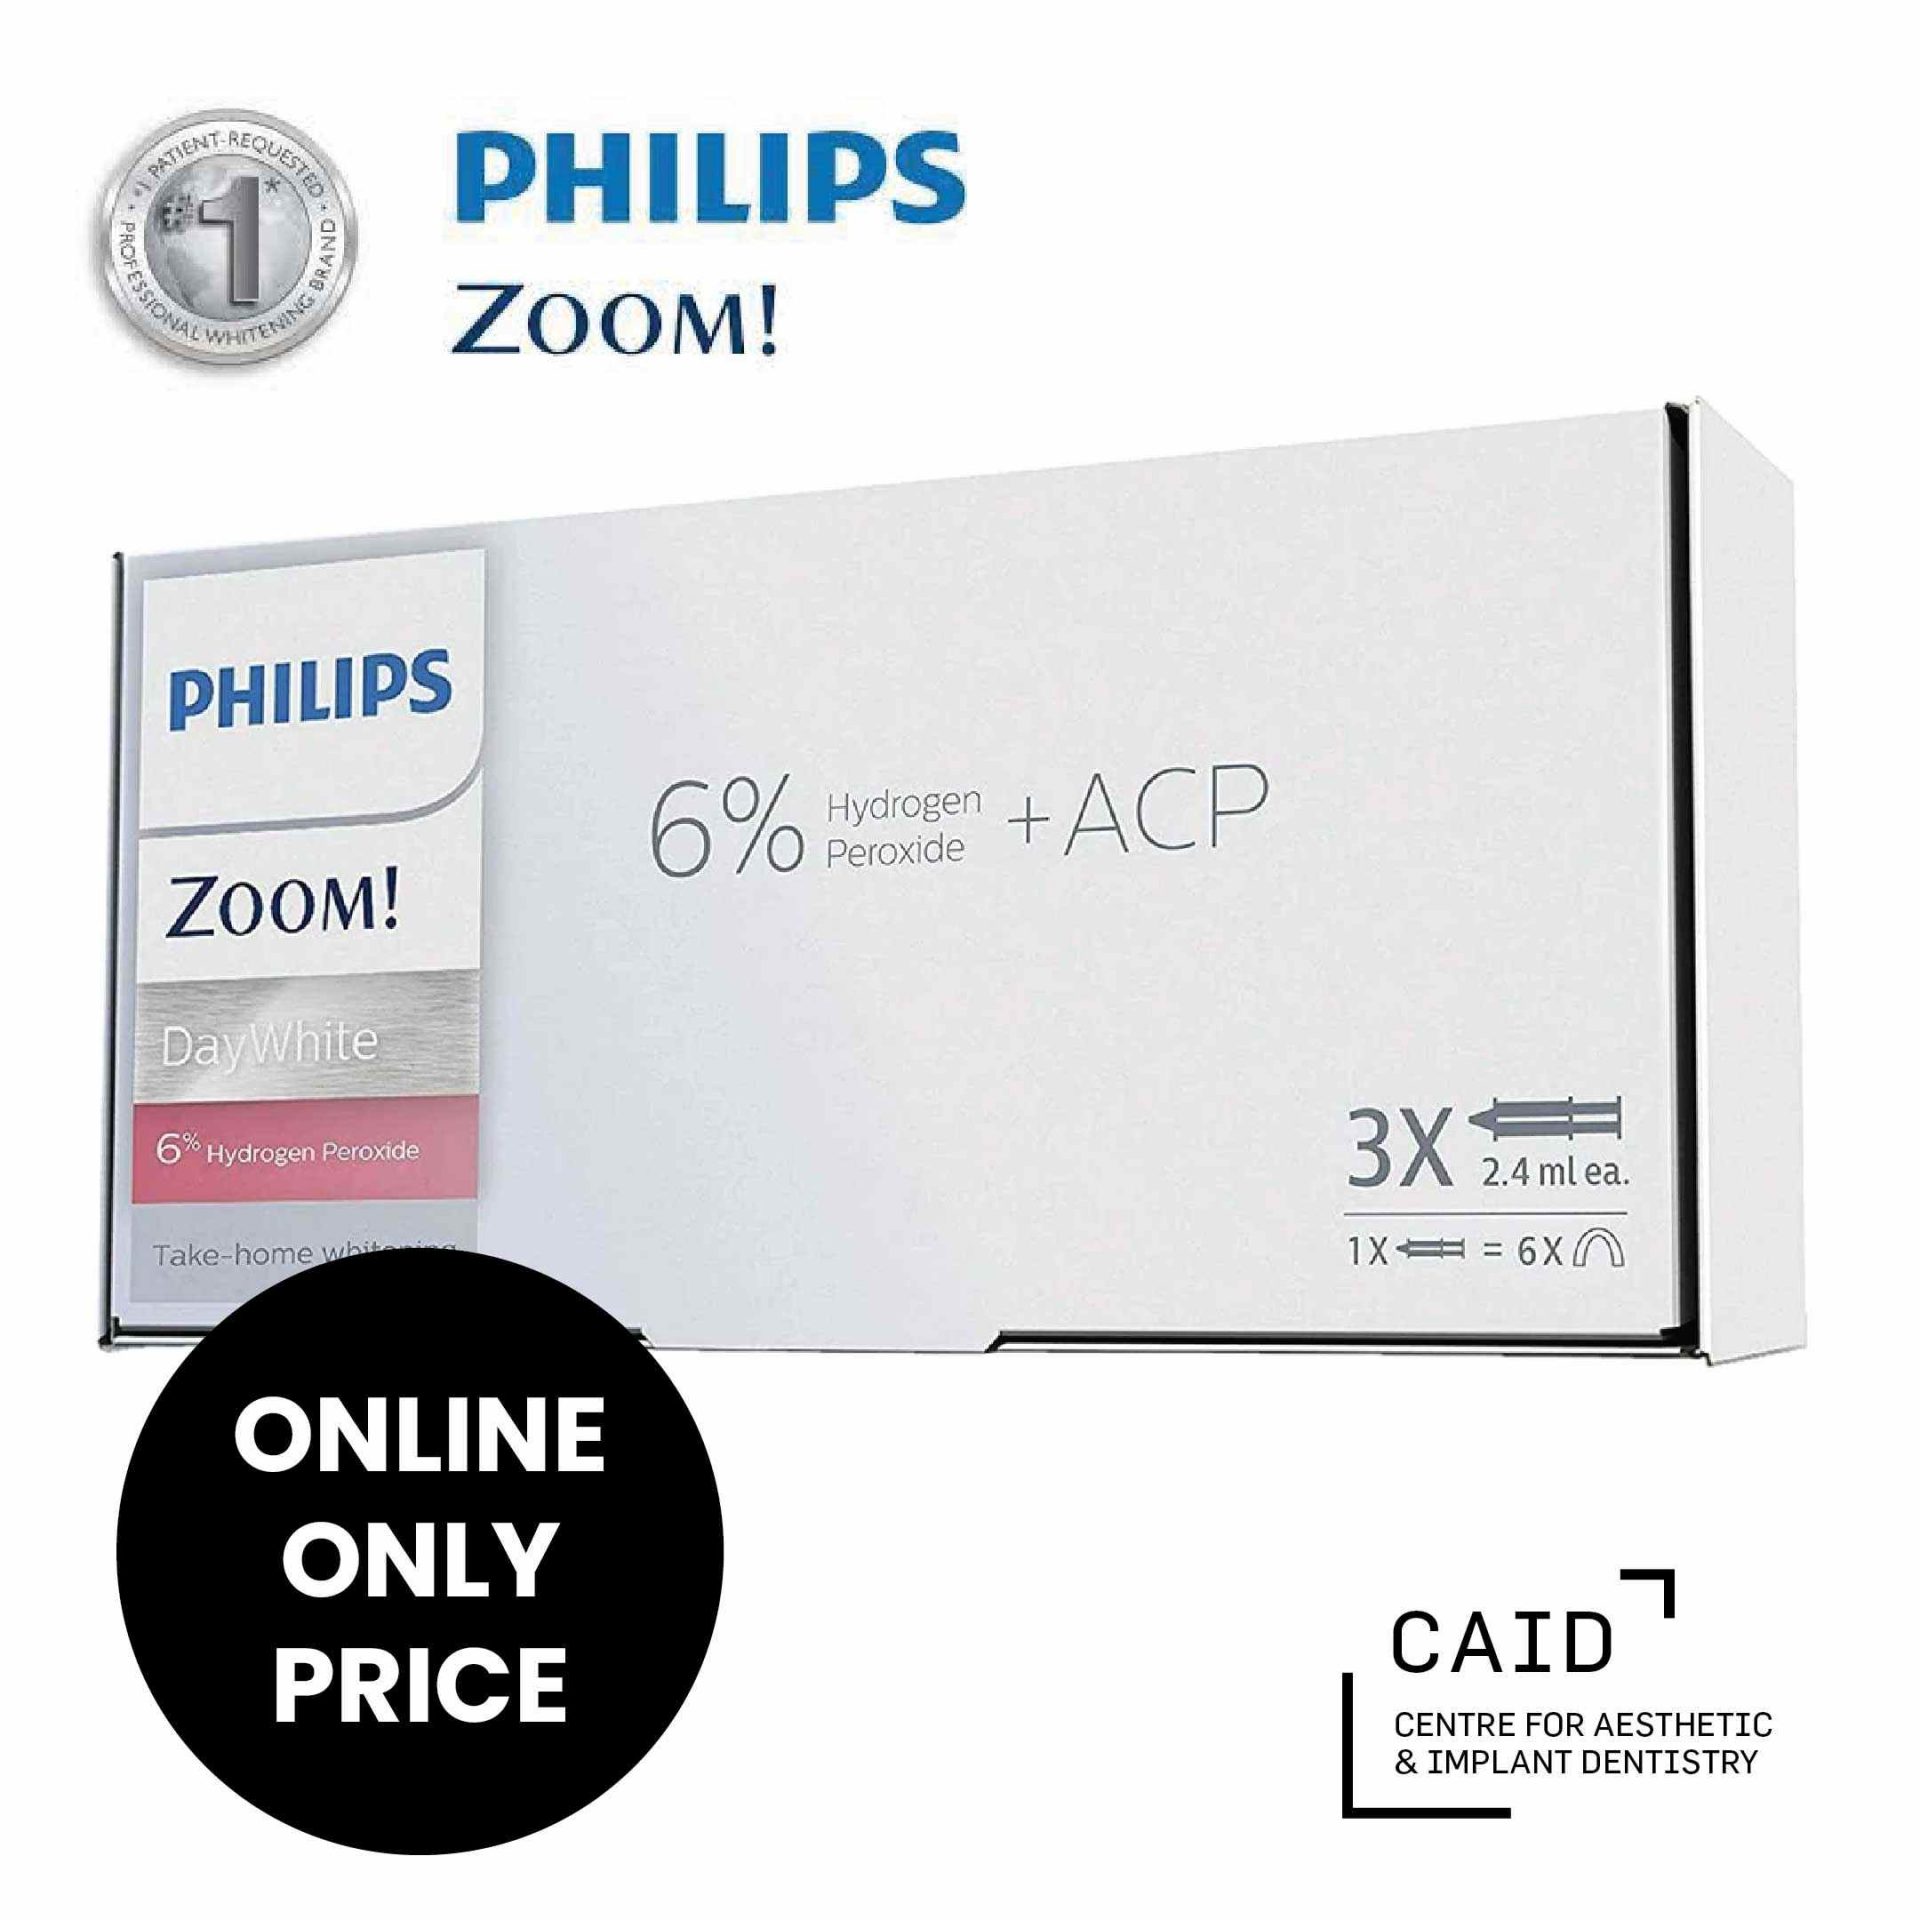 ONLINE ONLY Cost Phillips Zoom Whitening Kits $350﻿